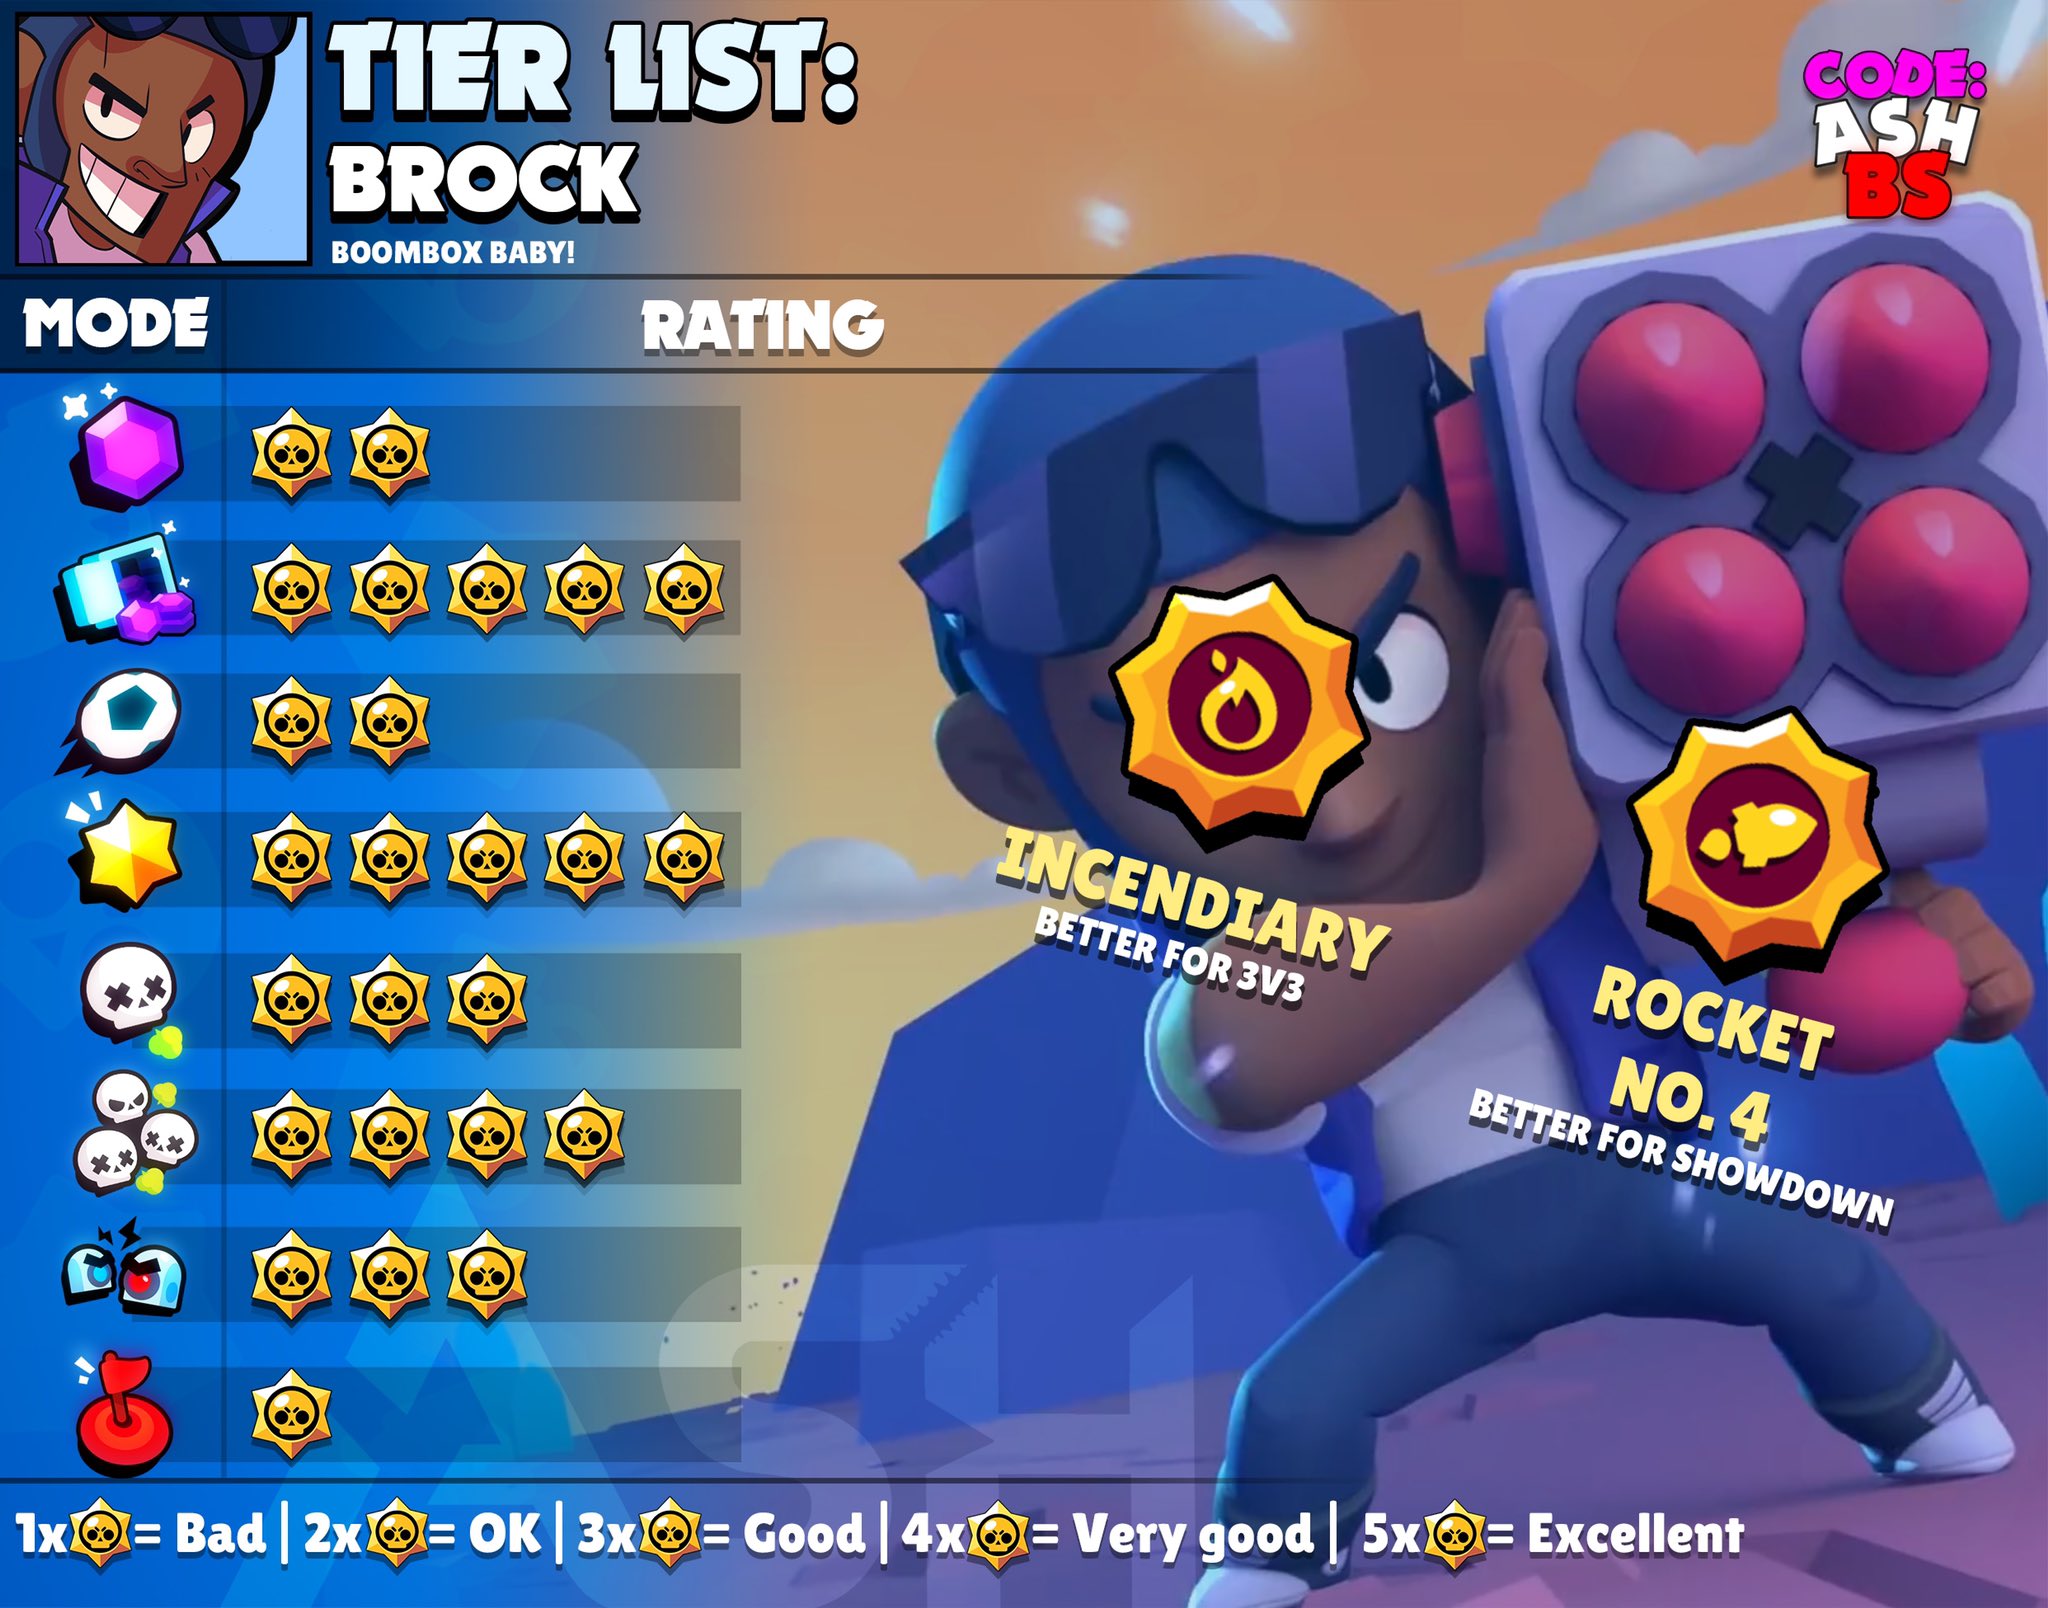 Code Ashbs On Twitter Brock Tier List For Every Game Mode With Best Maps And Suggested Comps Which Brawler Should I Do Next Brock Brawlstars Https T Co Igweji73sr - brawl stars poco is weak